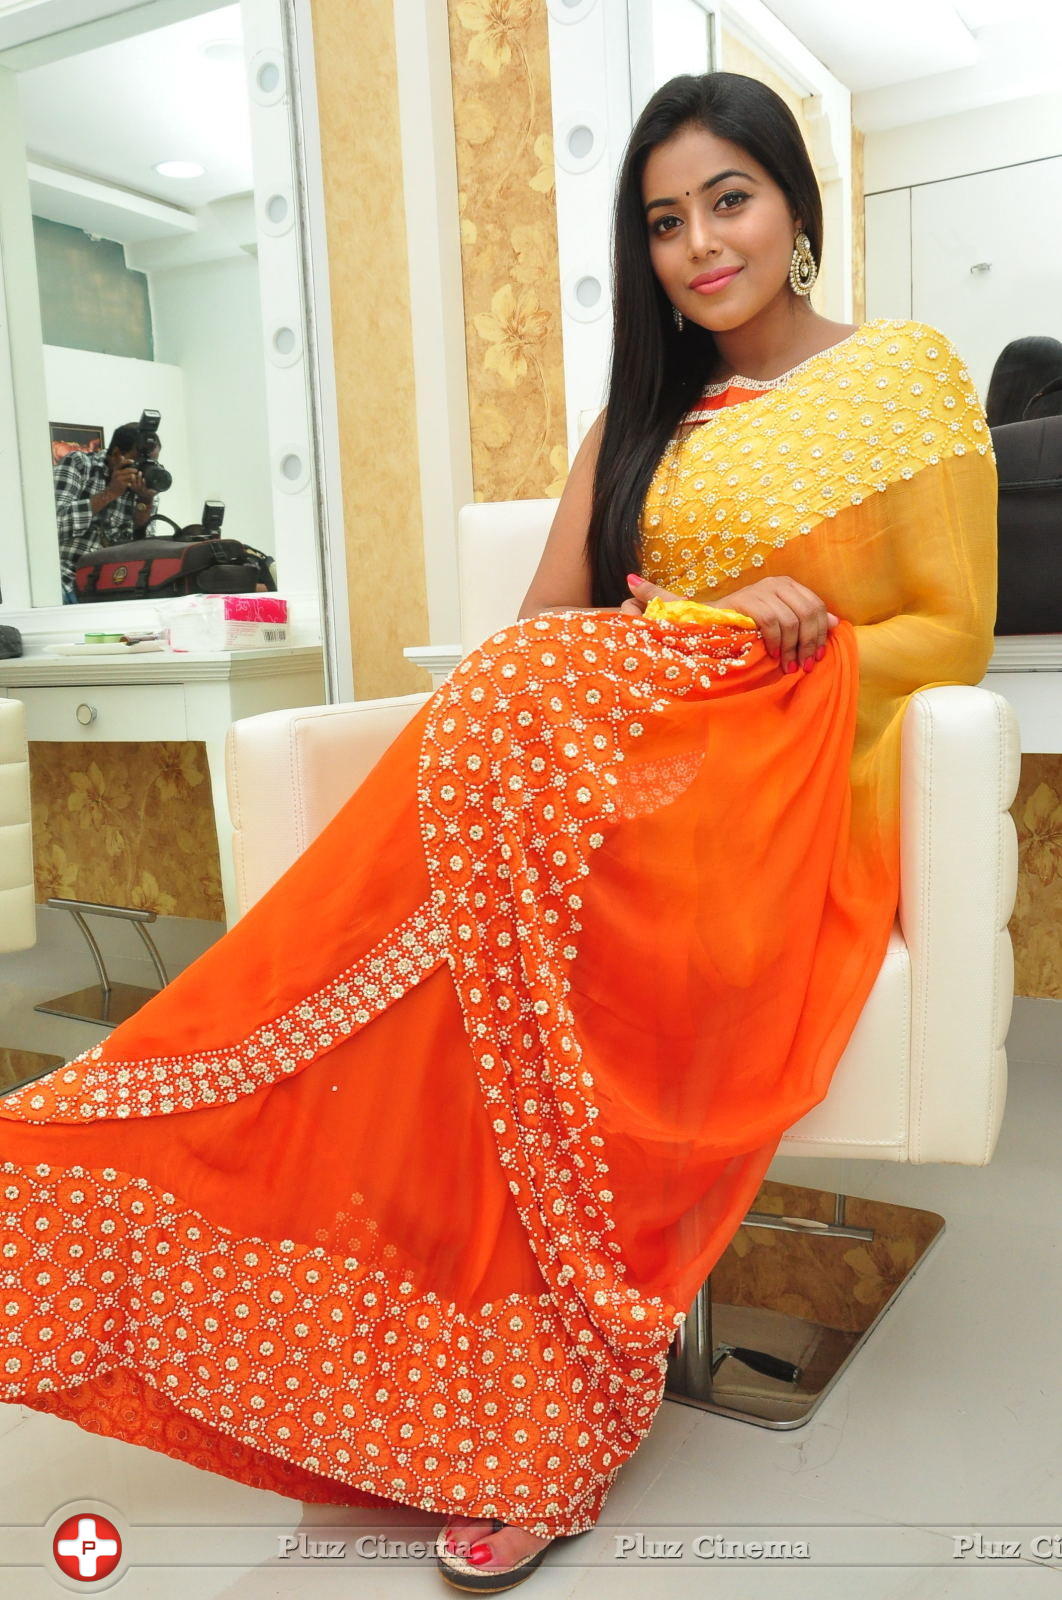 Poorna - Poorna Launches Naturals Beauty Salon Photos | Picture 1258849